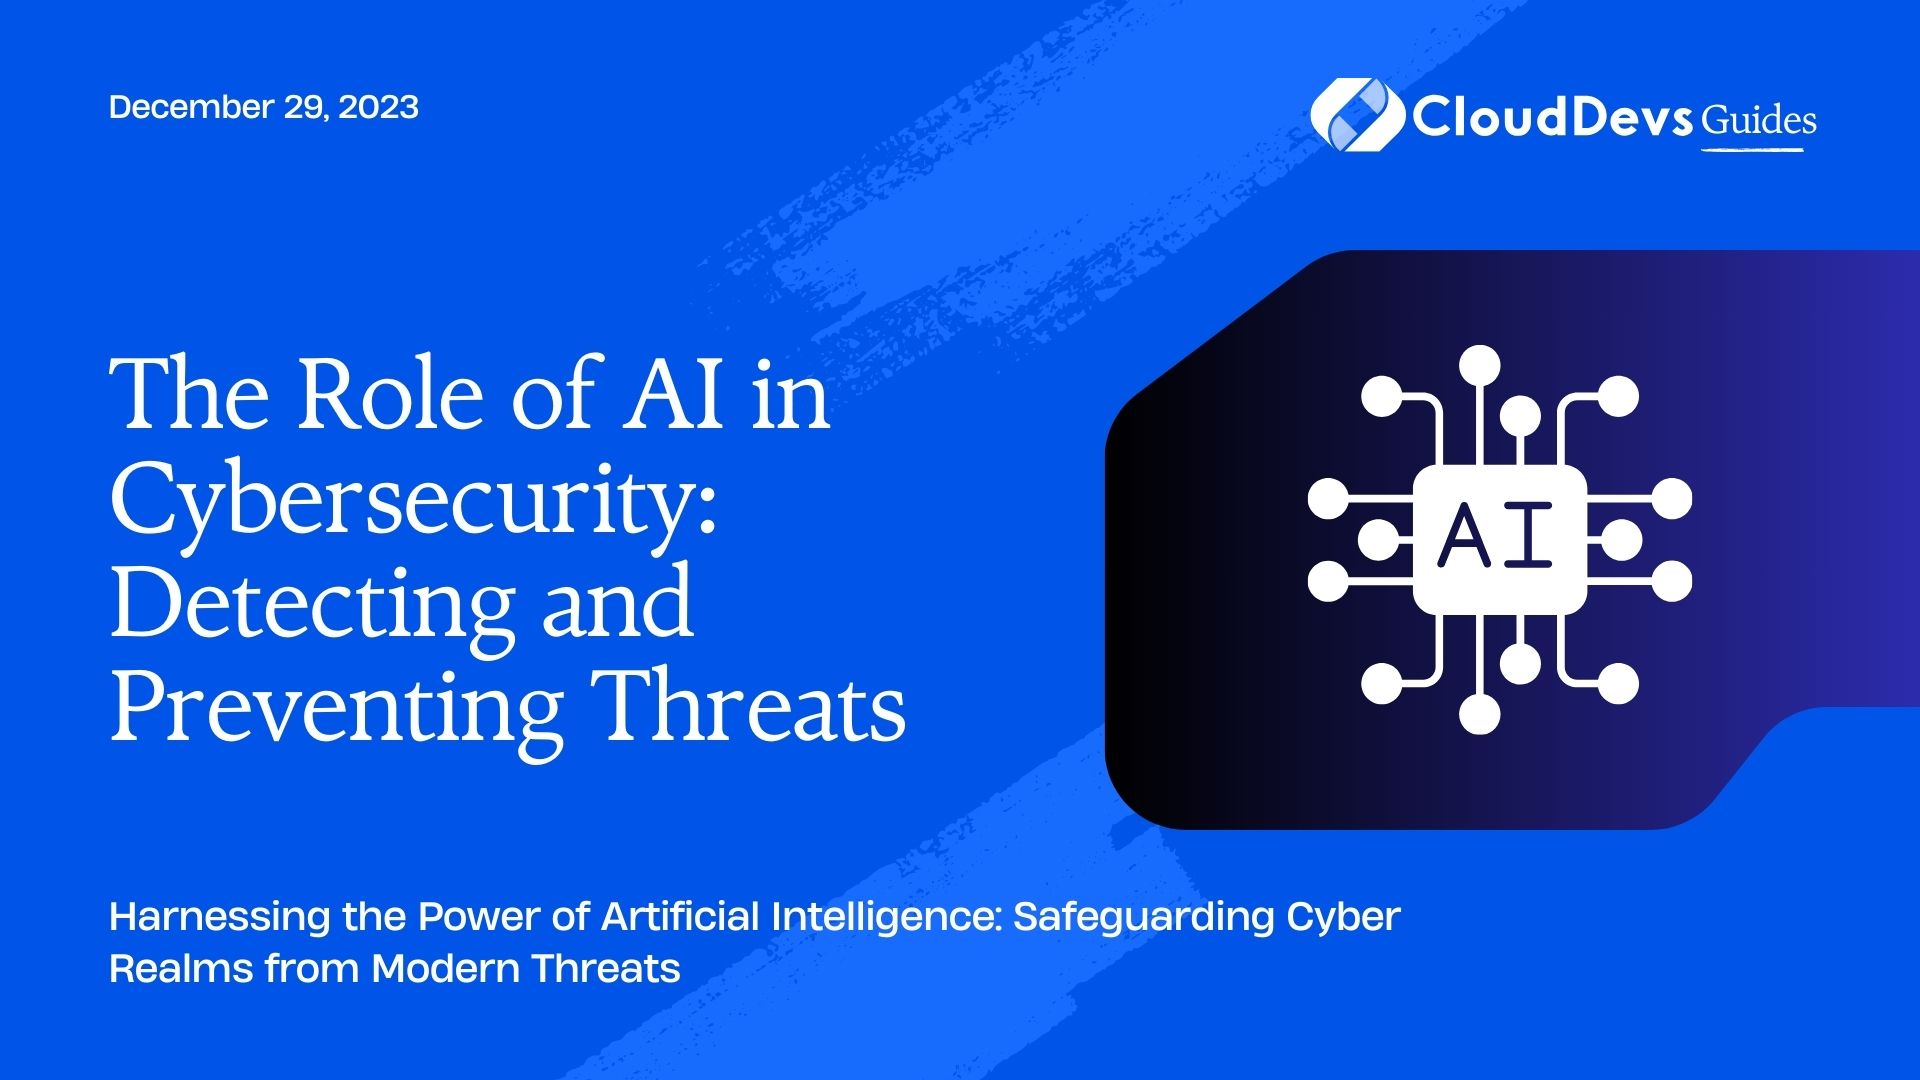 The Role of AI in Cybersecurity: Detecting and Preventing Threats